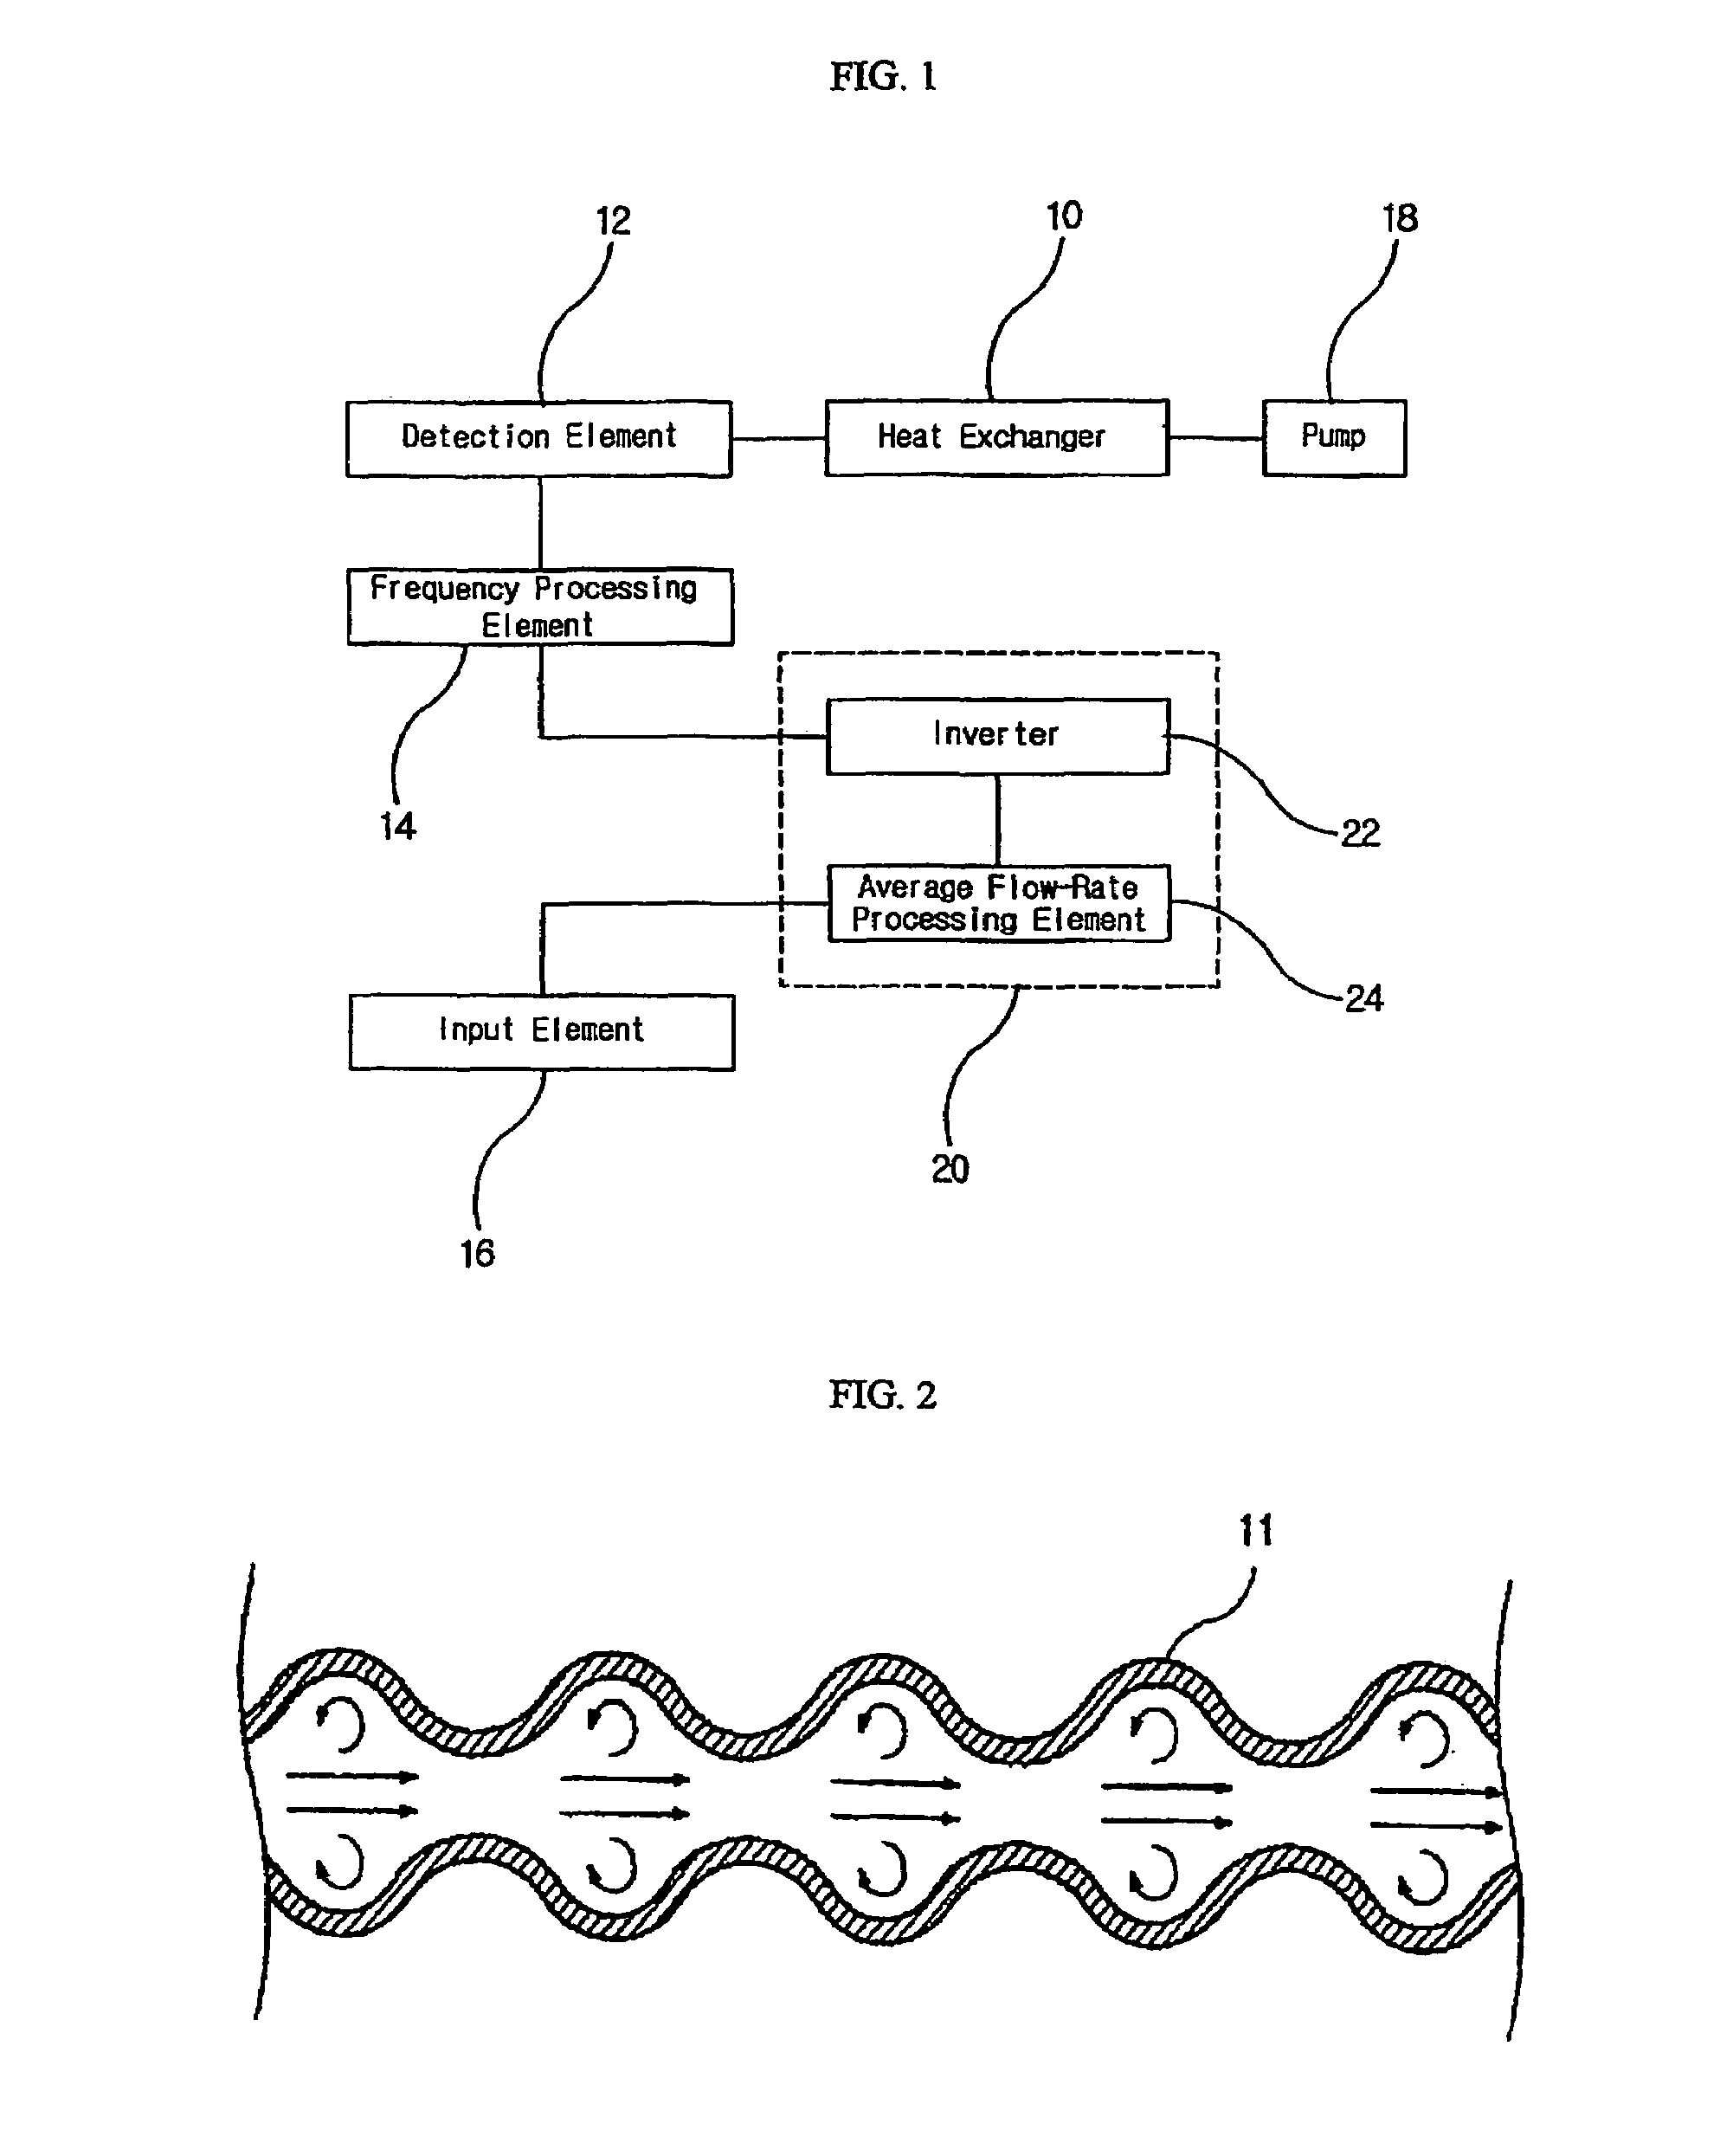 Feed-back control system for heat exchanger with natural shedding frequency